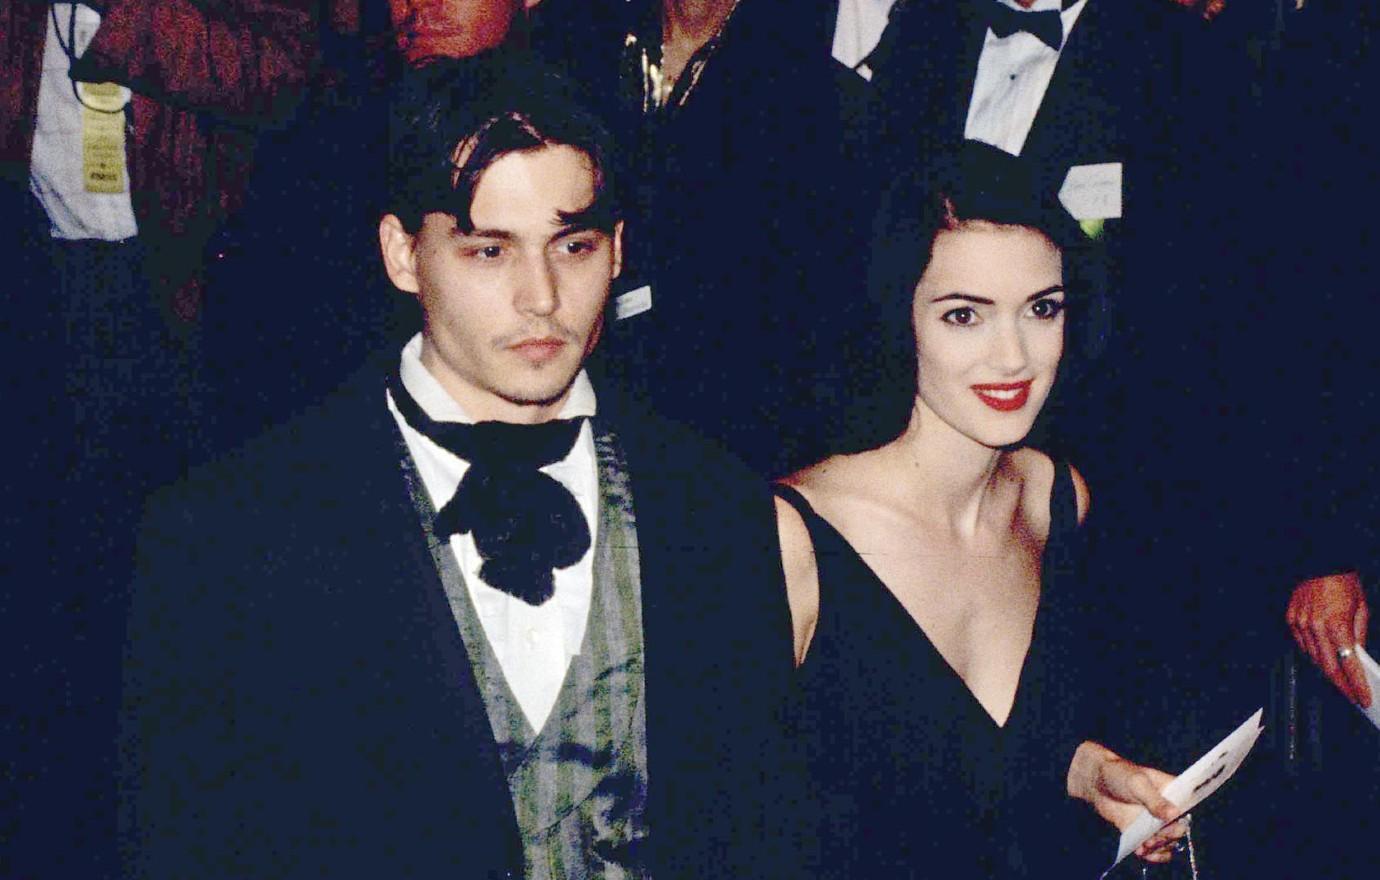 Winona Ryder Says She Was In A Dark Place After Johnny Depp Breakup